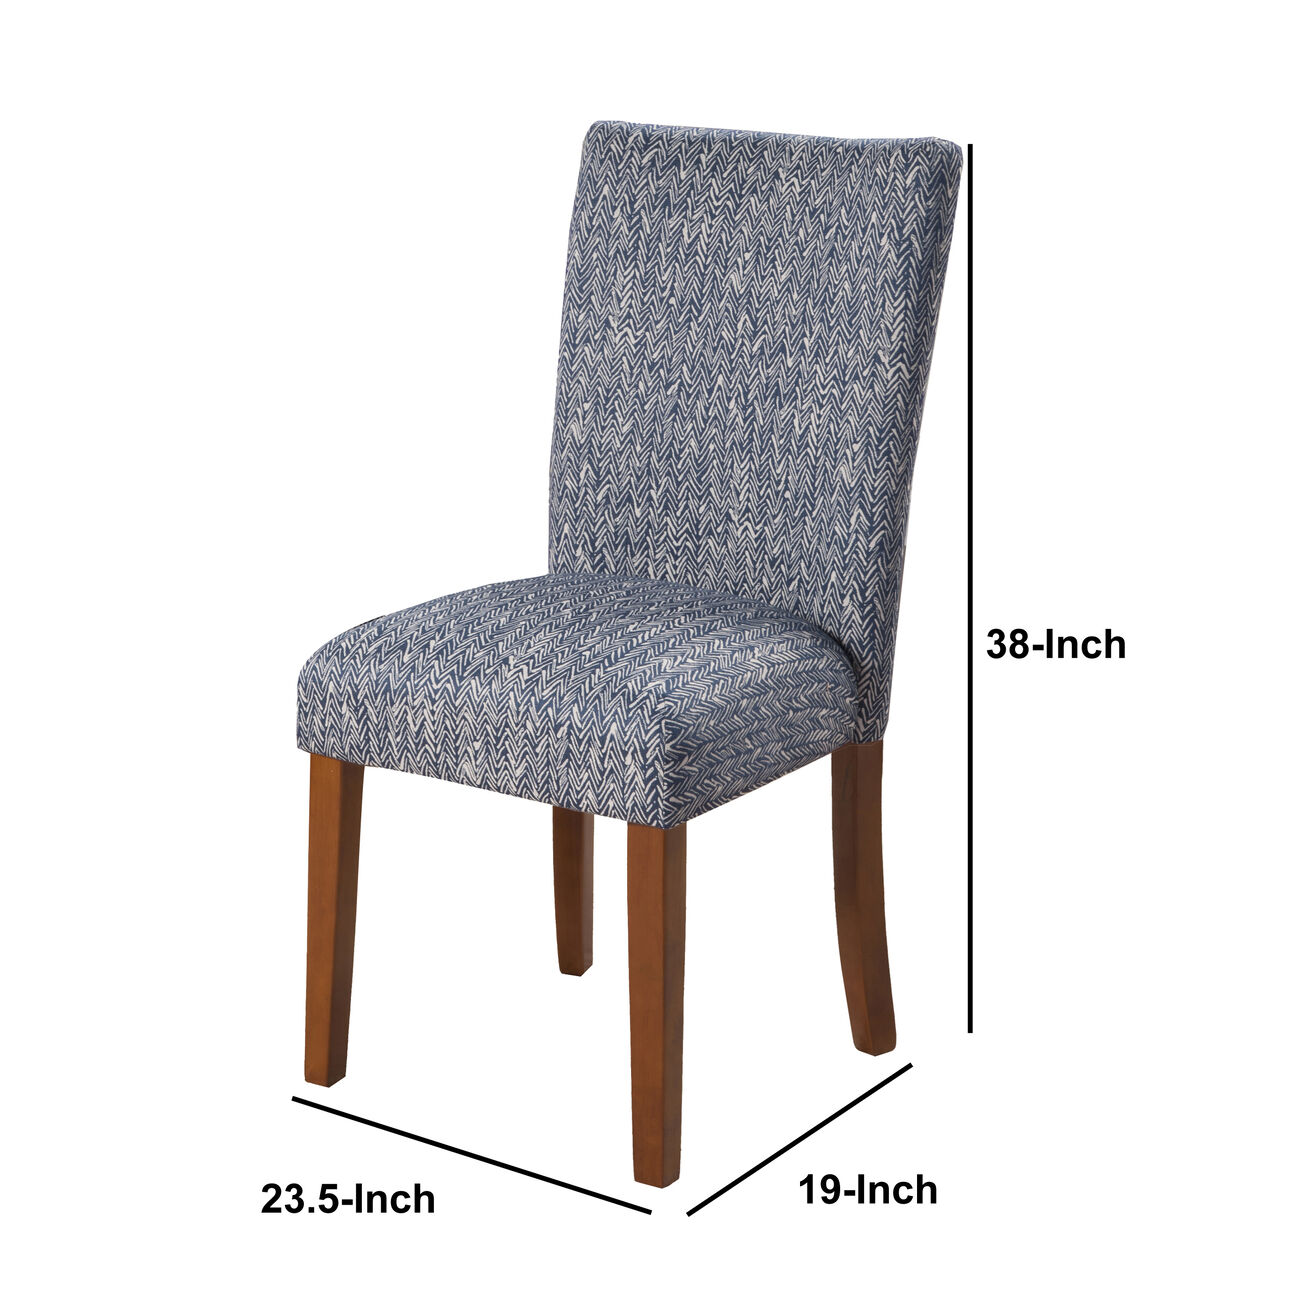 Textured Fabric Upholstered Parson Dining Chair with Wooden Legs, Blue and Brown, Set of Two